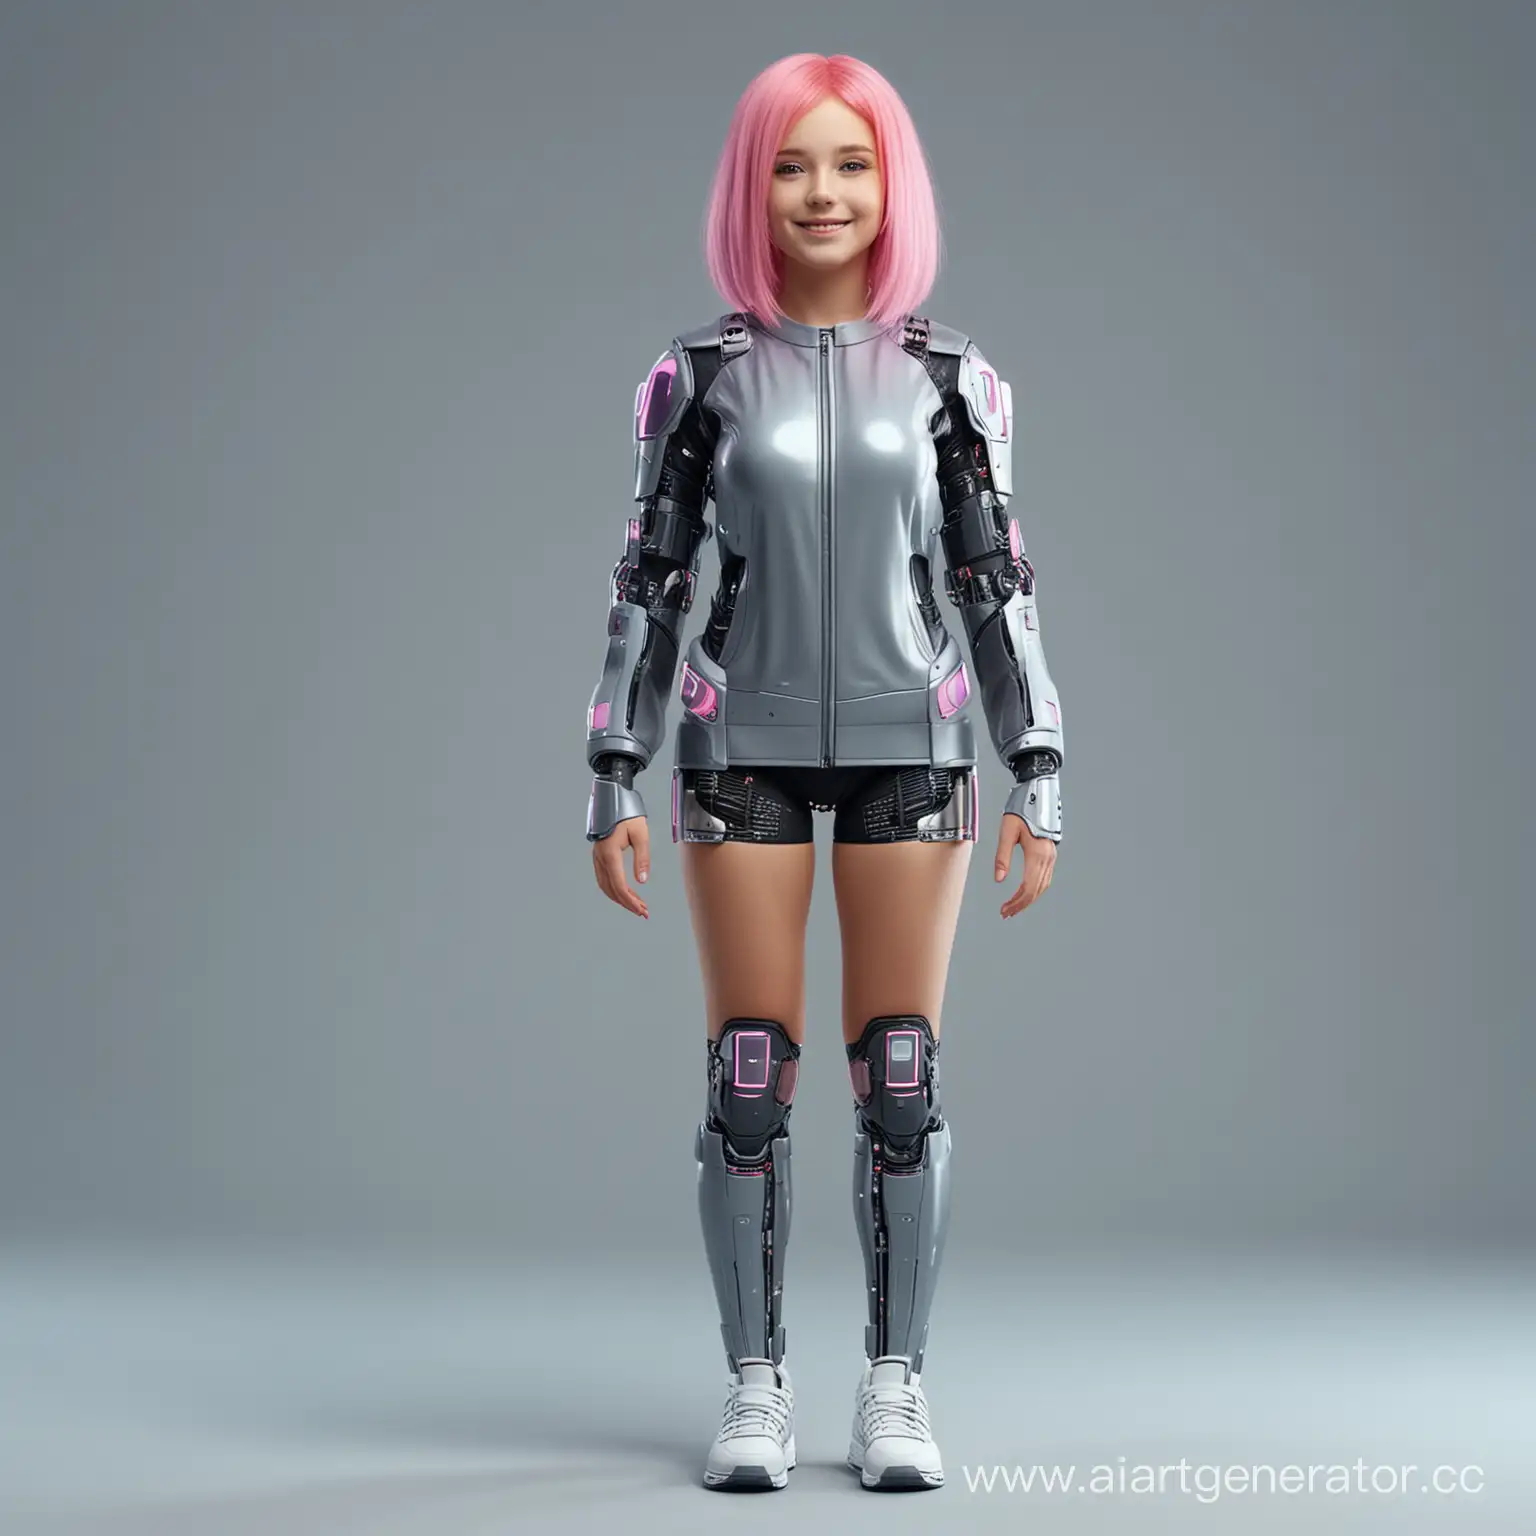 Futuristic-Smiling-Girl-with-Colored-Hair-AI-Art